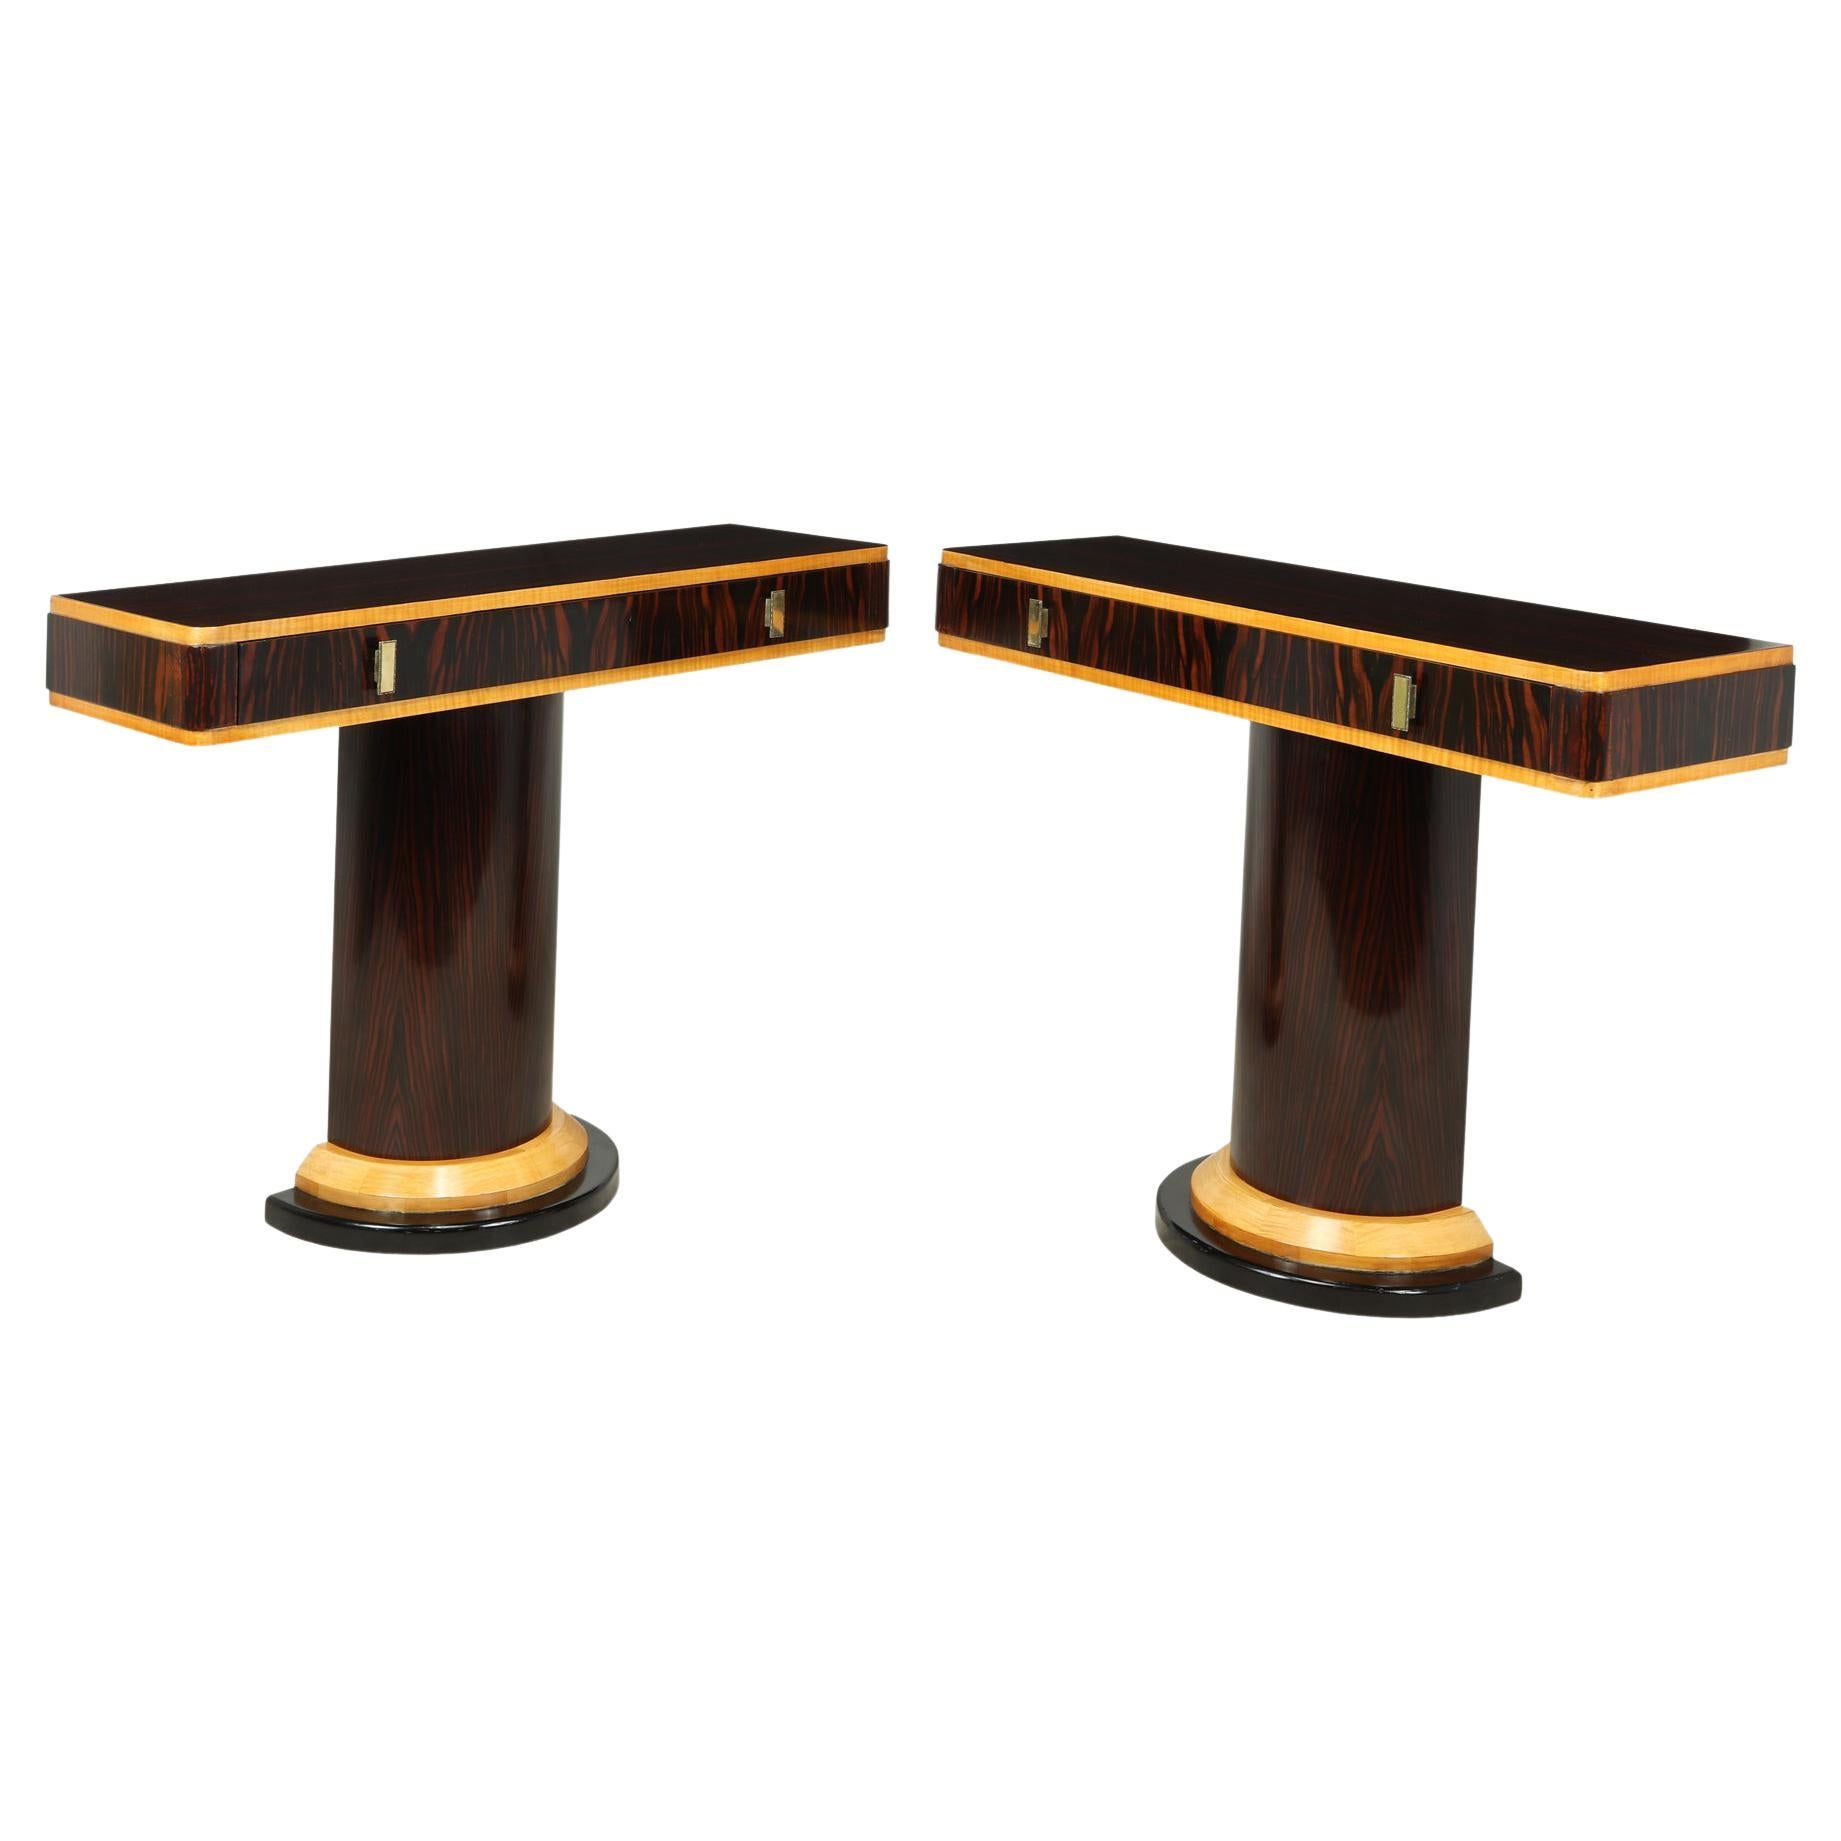 Pair of French Art Deco Console Tables in Macassar Ebony, c1925